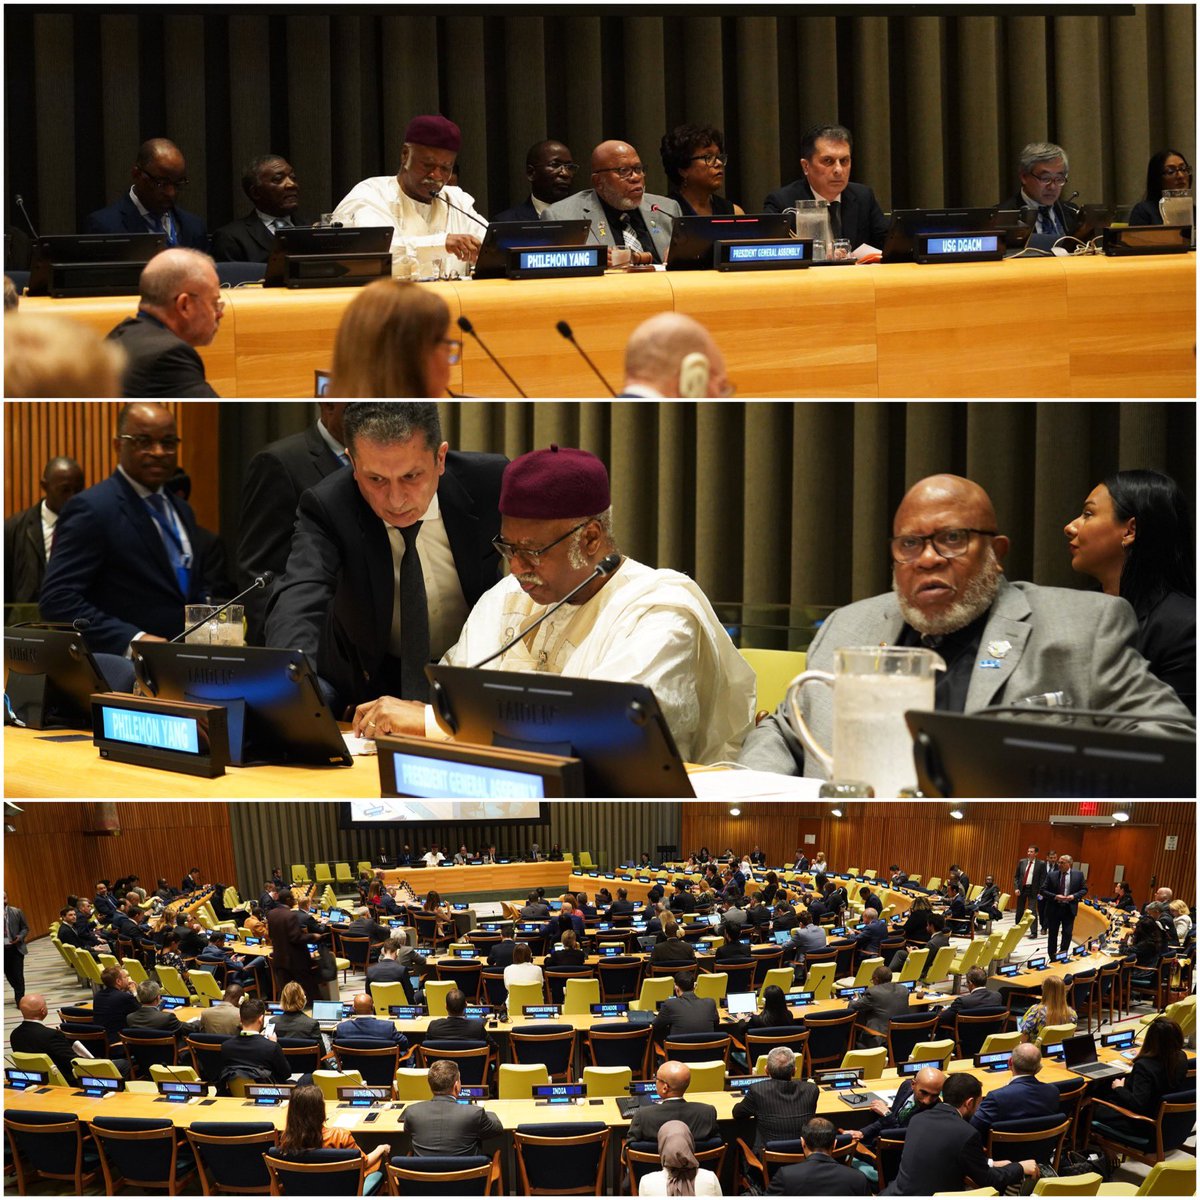 Today, UNGA held an informal interactive dialogue with H.E. Philemon Yang, the distinguished candidate for #UNGA79 President from Cameroon. 🇨🇲 H.E Yang’s vision statement offers a powerful perspective on addressing urgent global challenges. Congratulations to the Group of